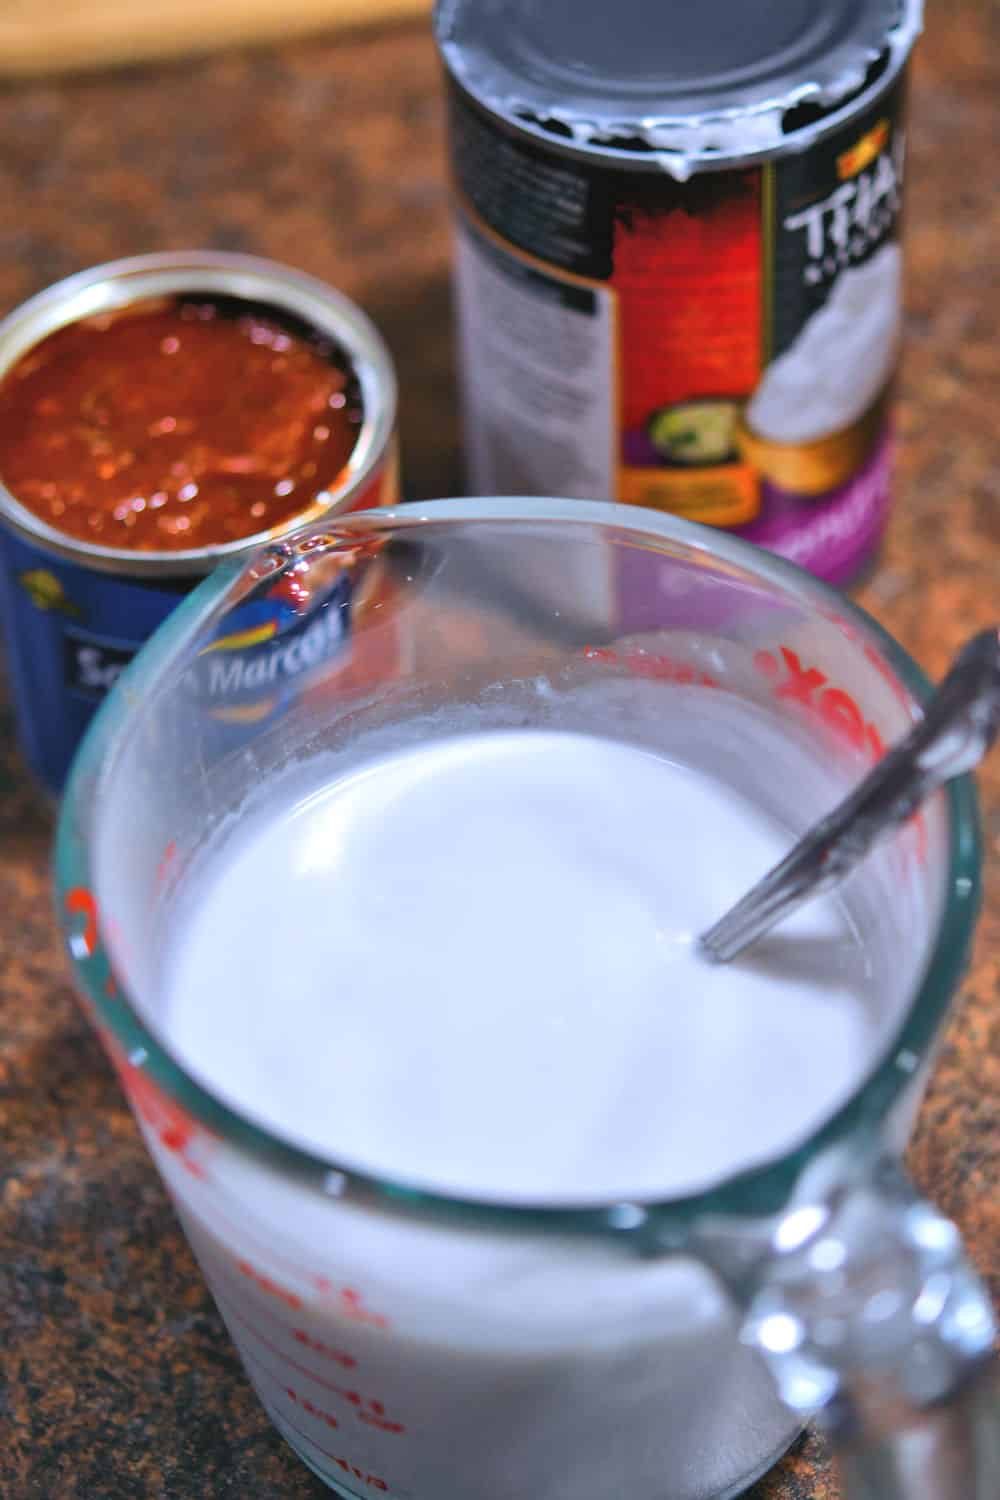 a measuring cup full of coconut cream which has been briskly stirred together to incorporate the solids and liquids